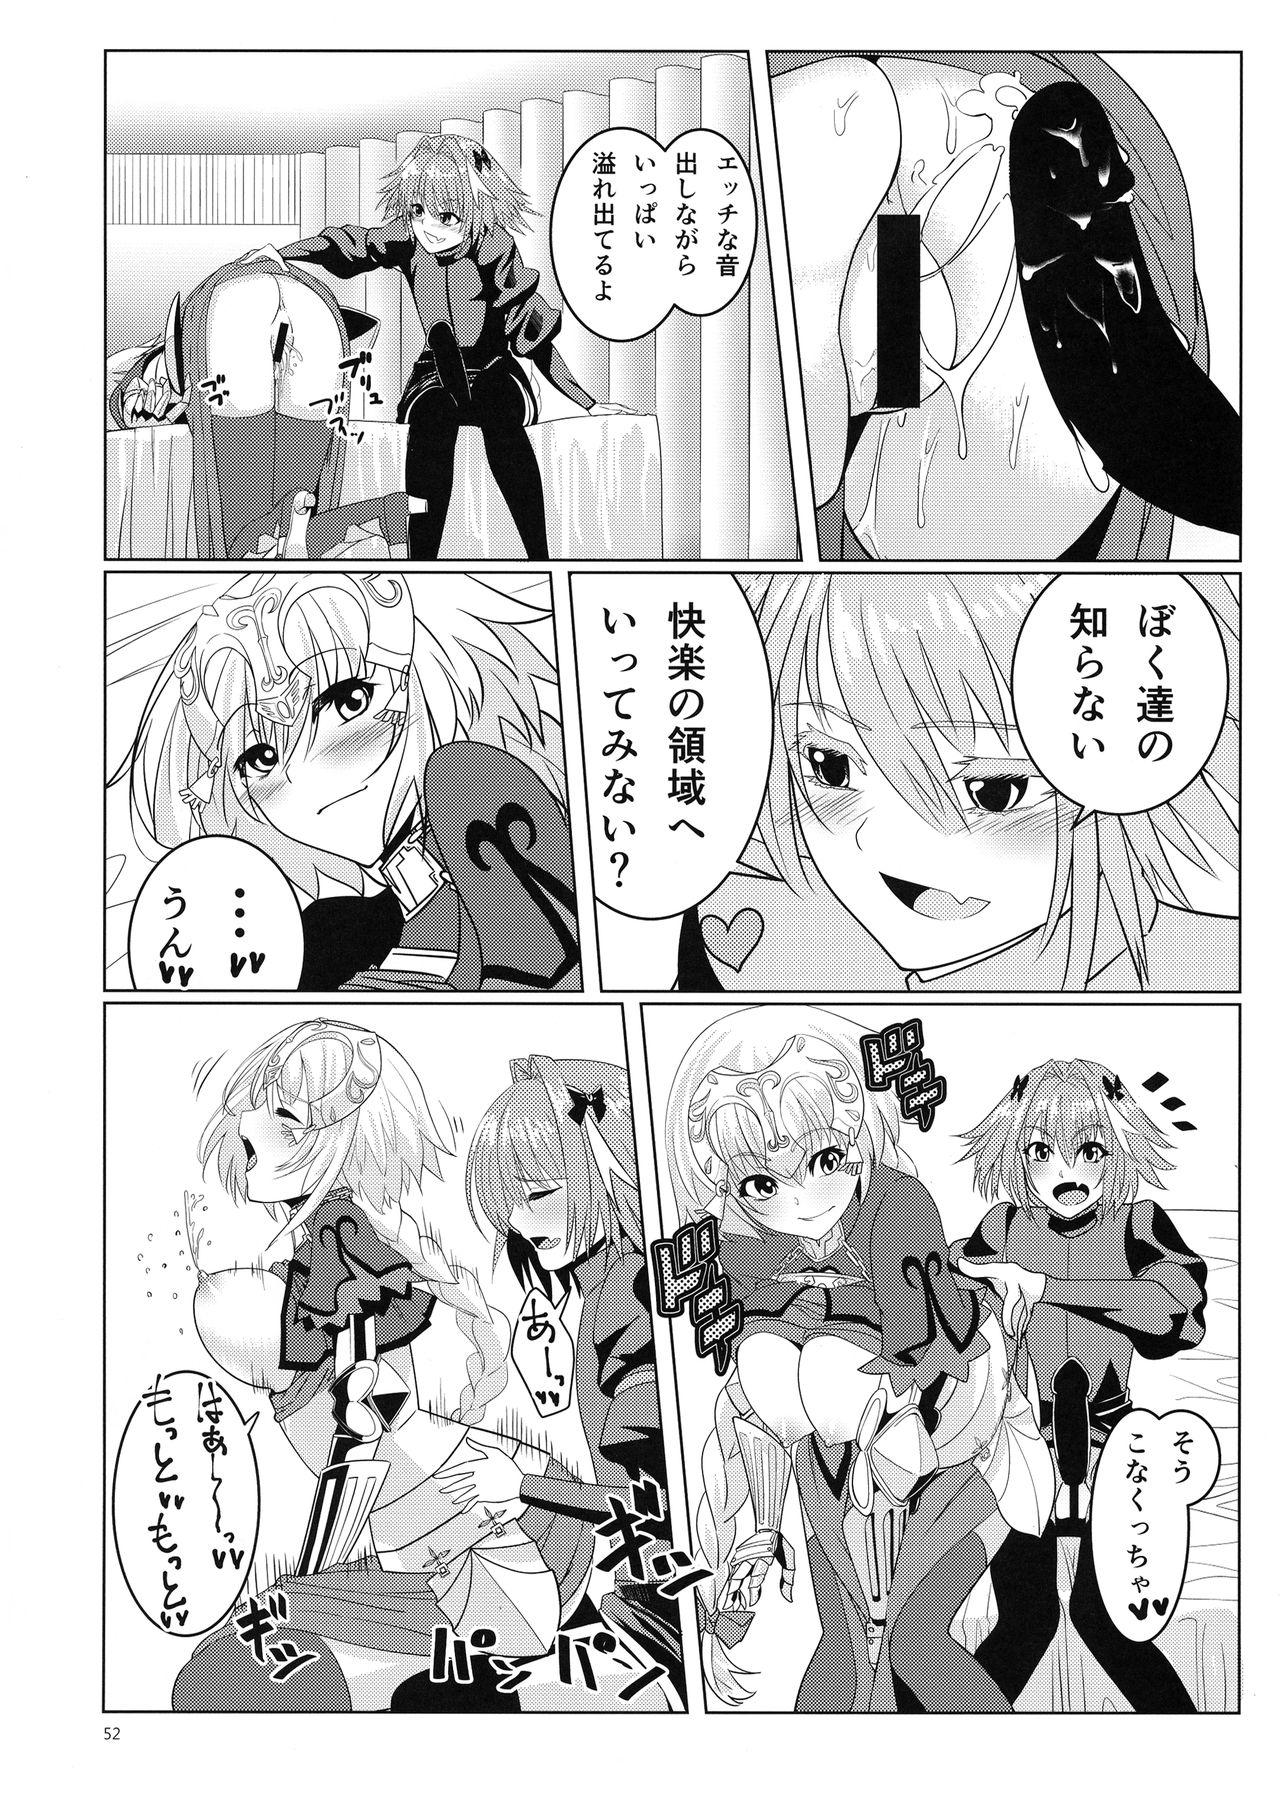 Matching Spirits - Jeanne and Astolfo have sex 48